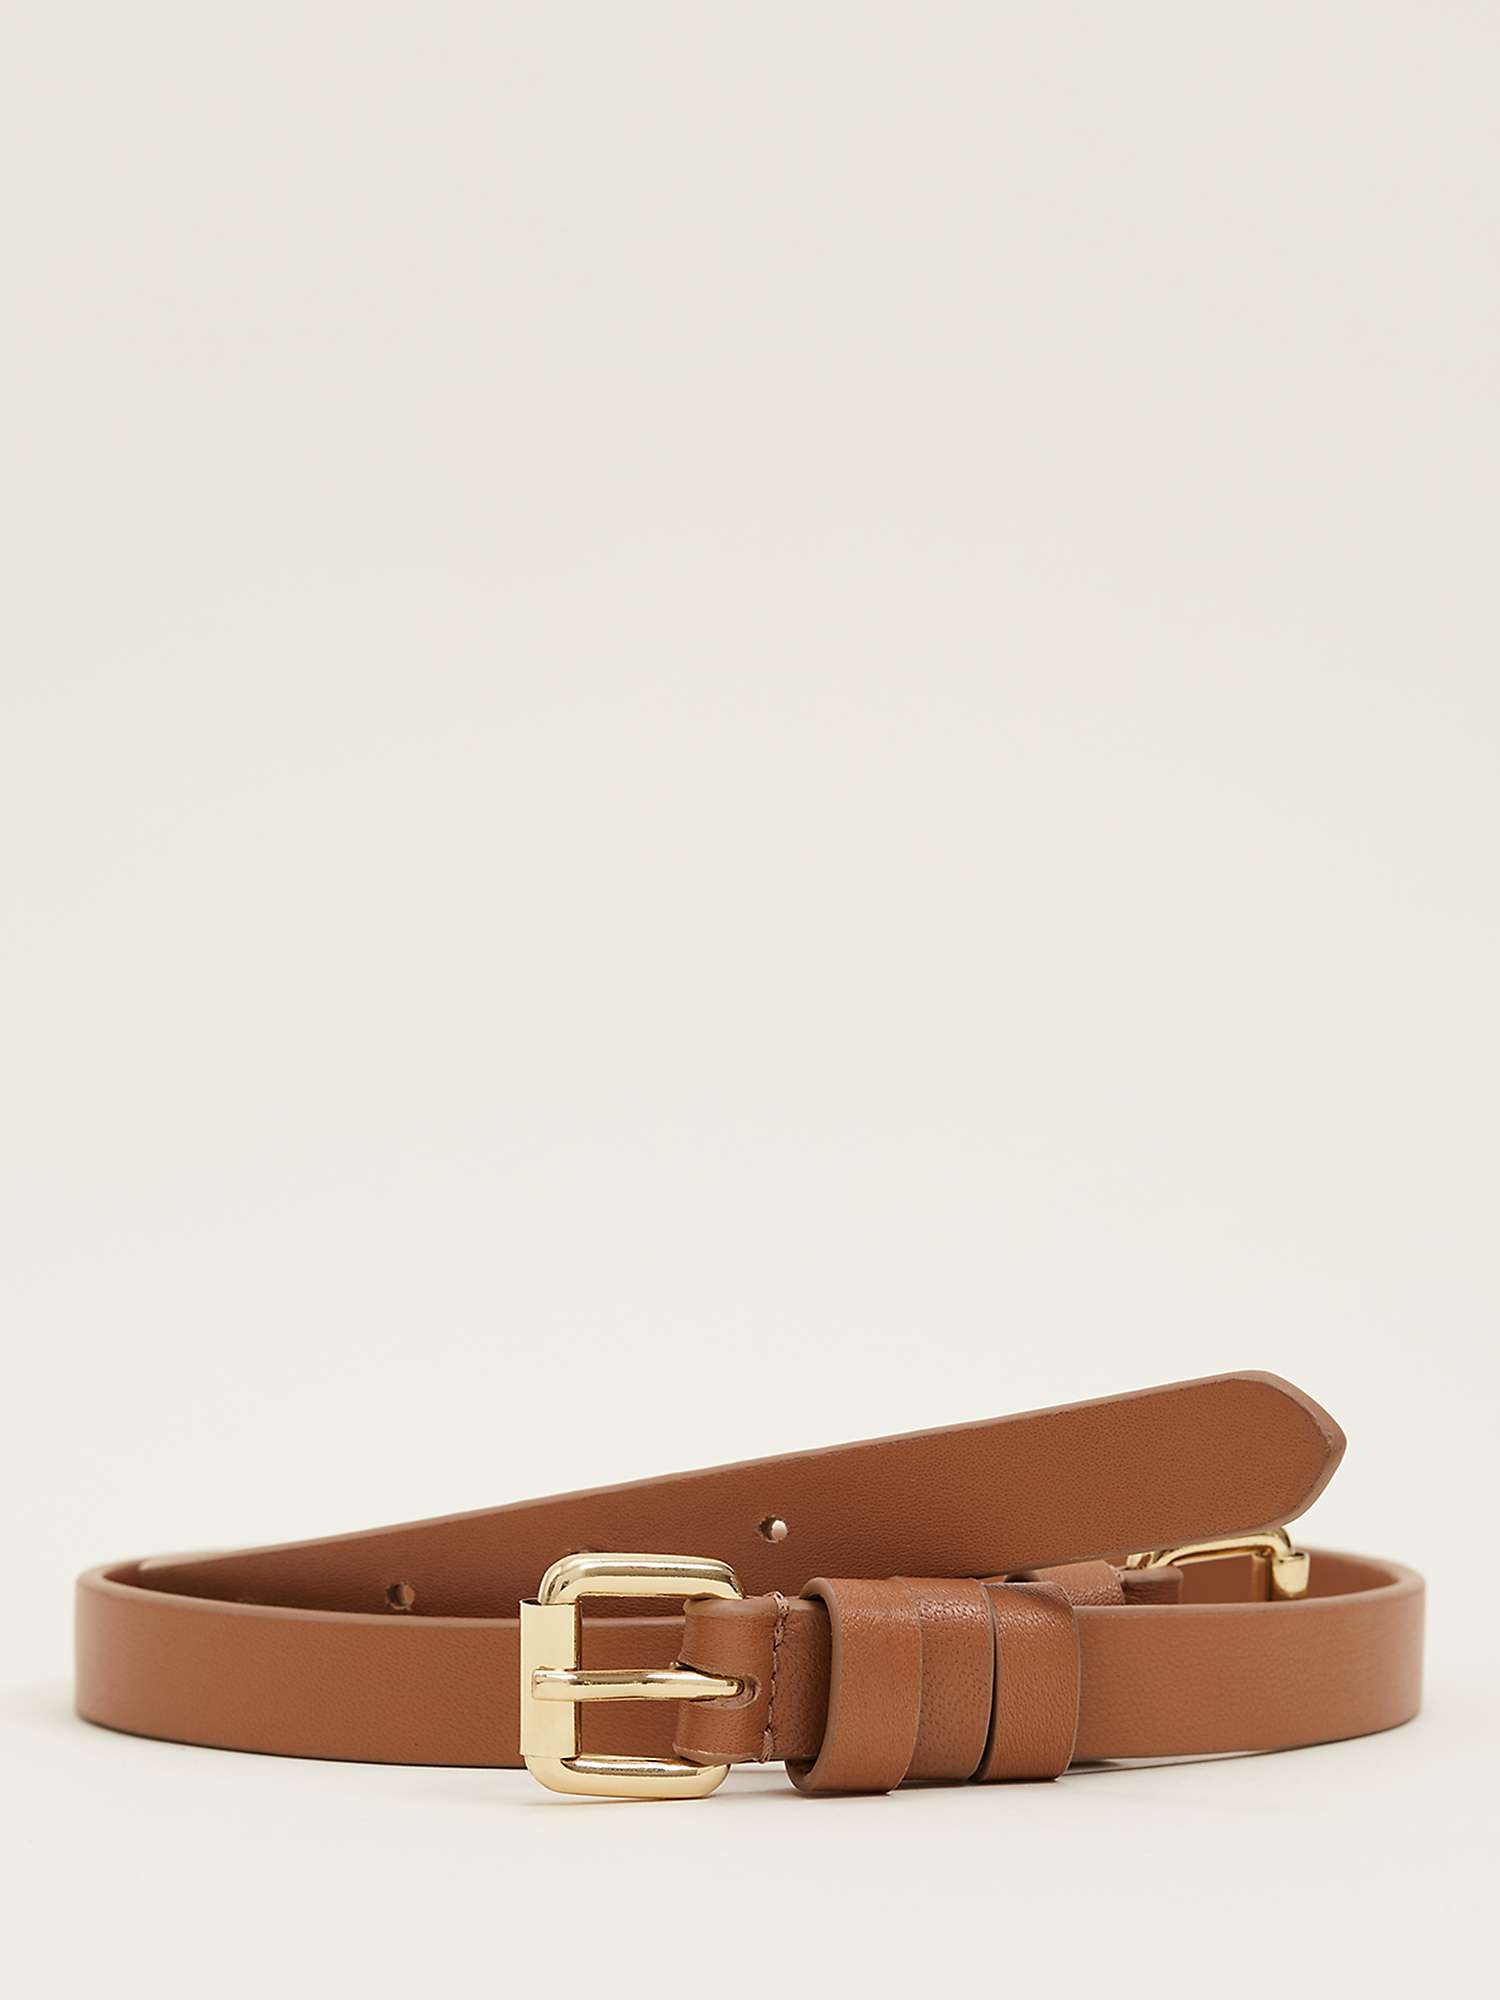 Buy Phase Eight Double Buckle Slim Leather Belt, Tan Online at johnlewis.com